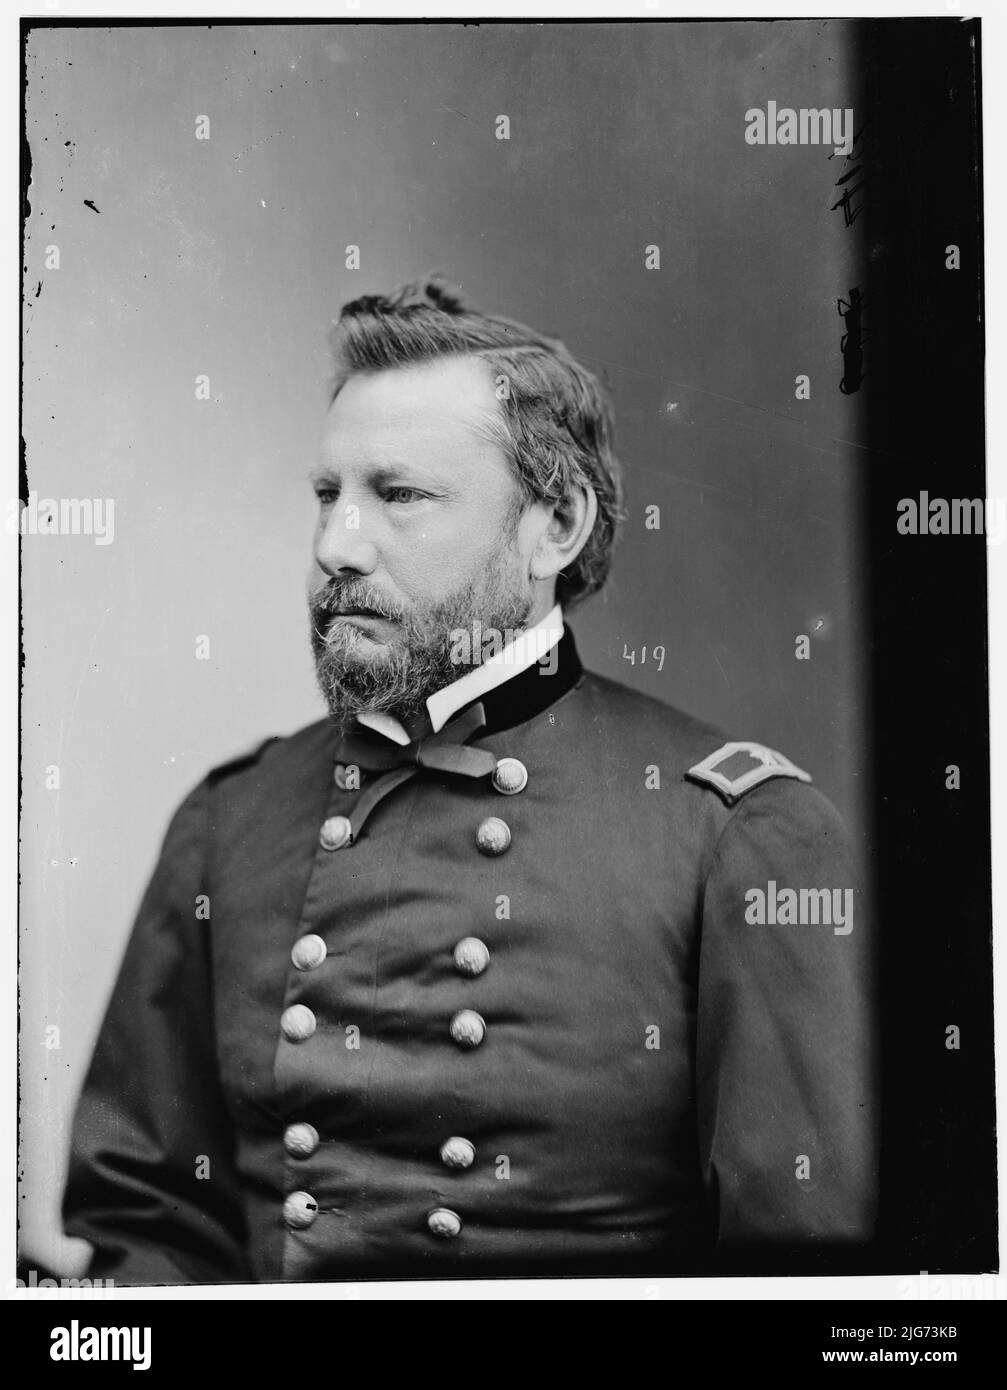 Gen. A.J. Myer, U.S.A. Chief Signal Officer, between 1870 and 1880. [Surgeon, first chief signal officer of the U.S. Army Signal Corps, inventor of wig-wag signalling (or aerial telegraphy), helped found US Weather Bureau]. Stock Photo